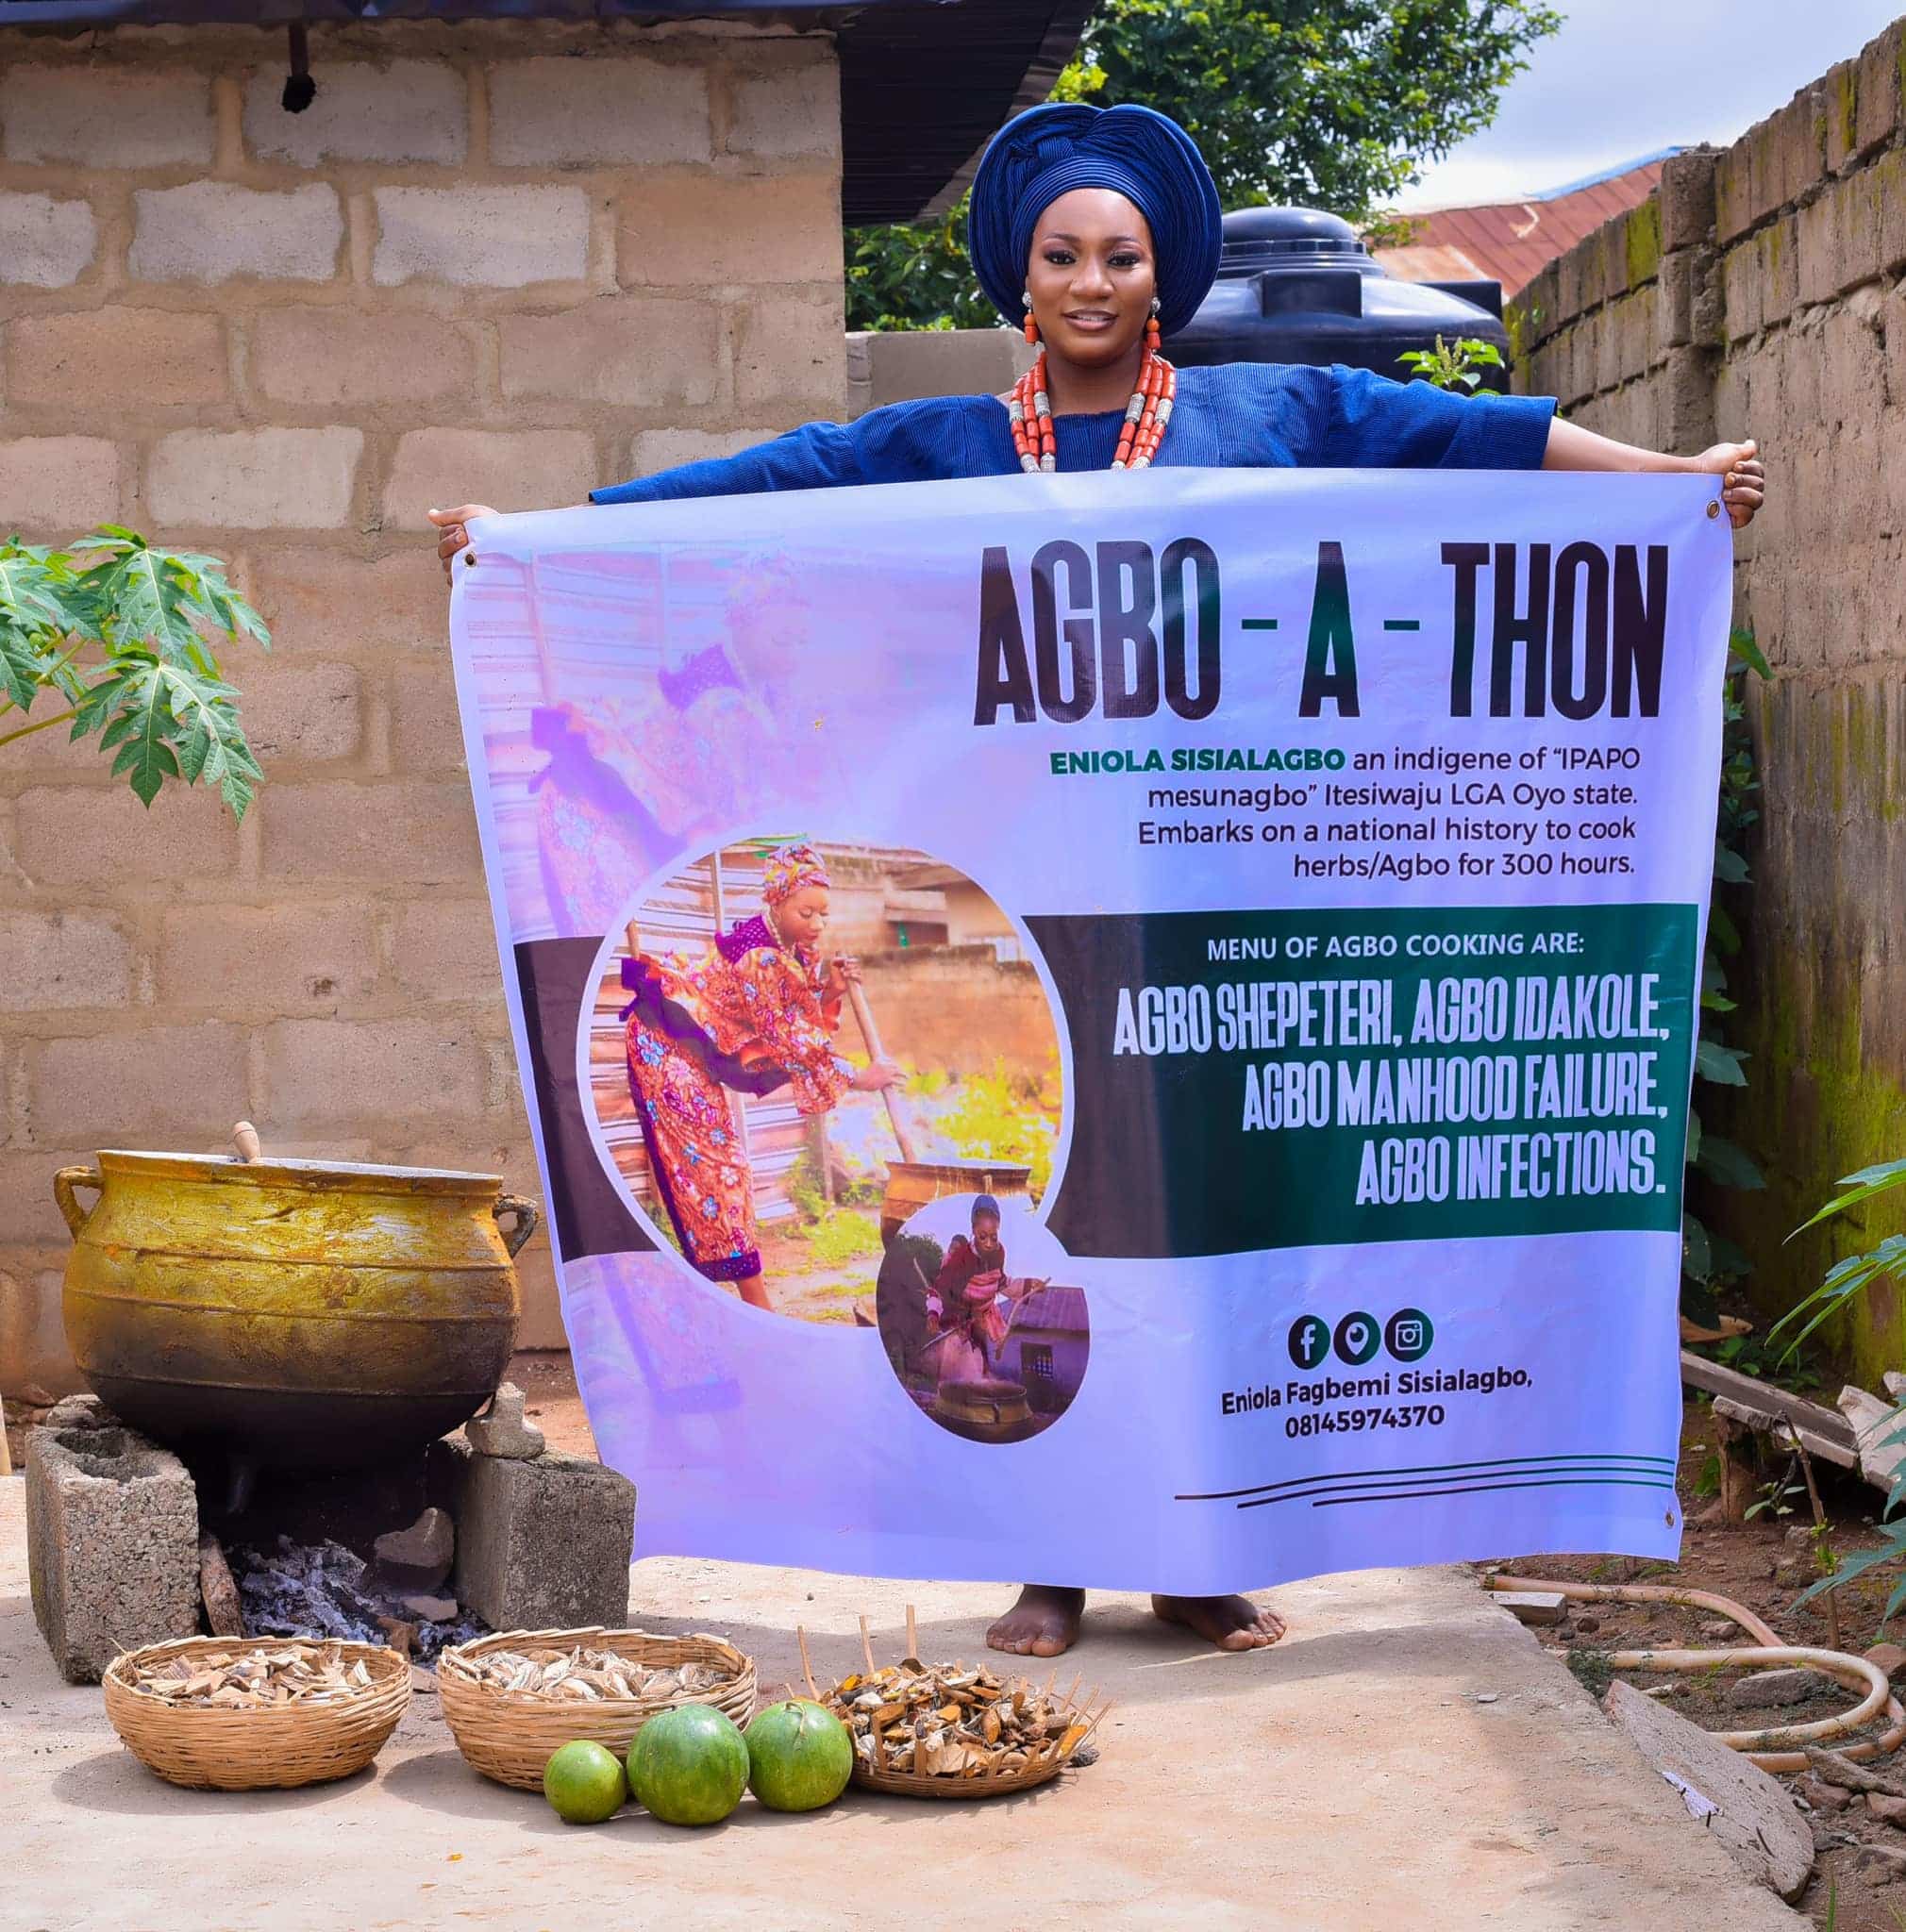 Agbo-A-Thon: Nigerian lady set to cook herbs for 300-hours to set world record